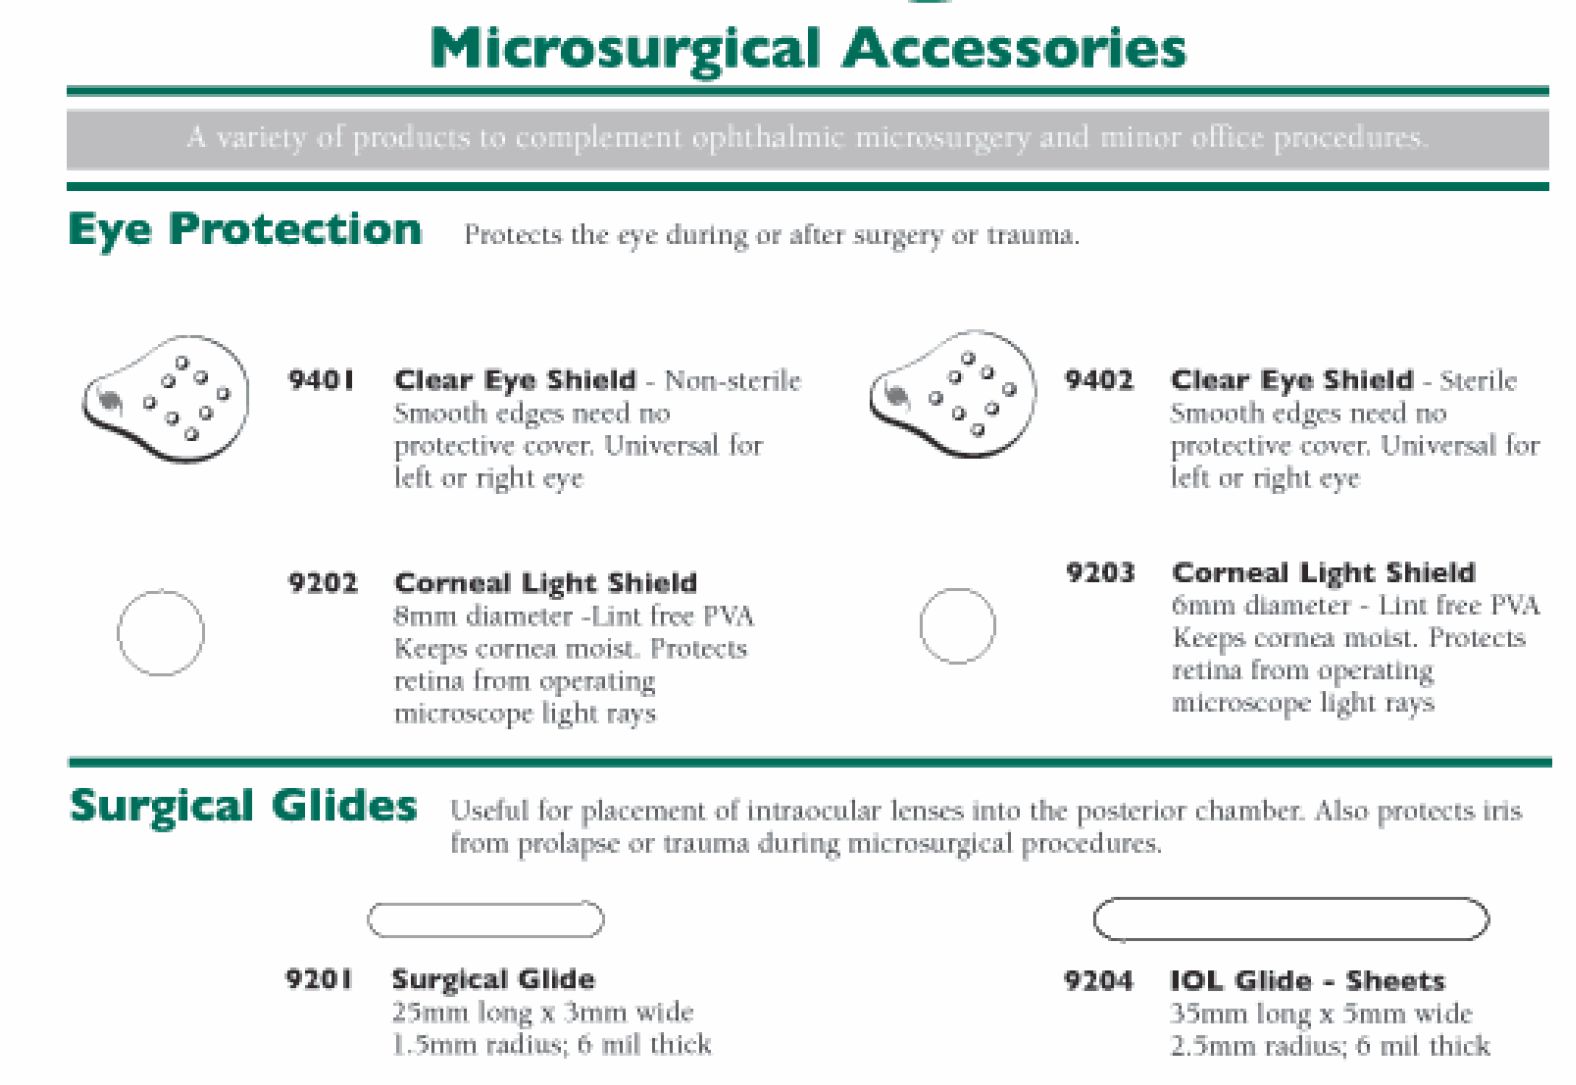 Microsurgical Accessories